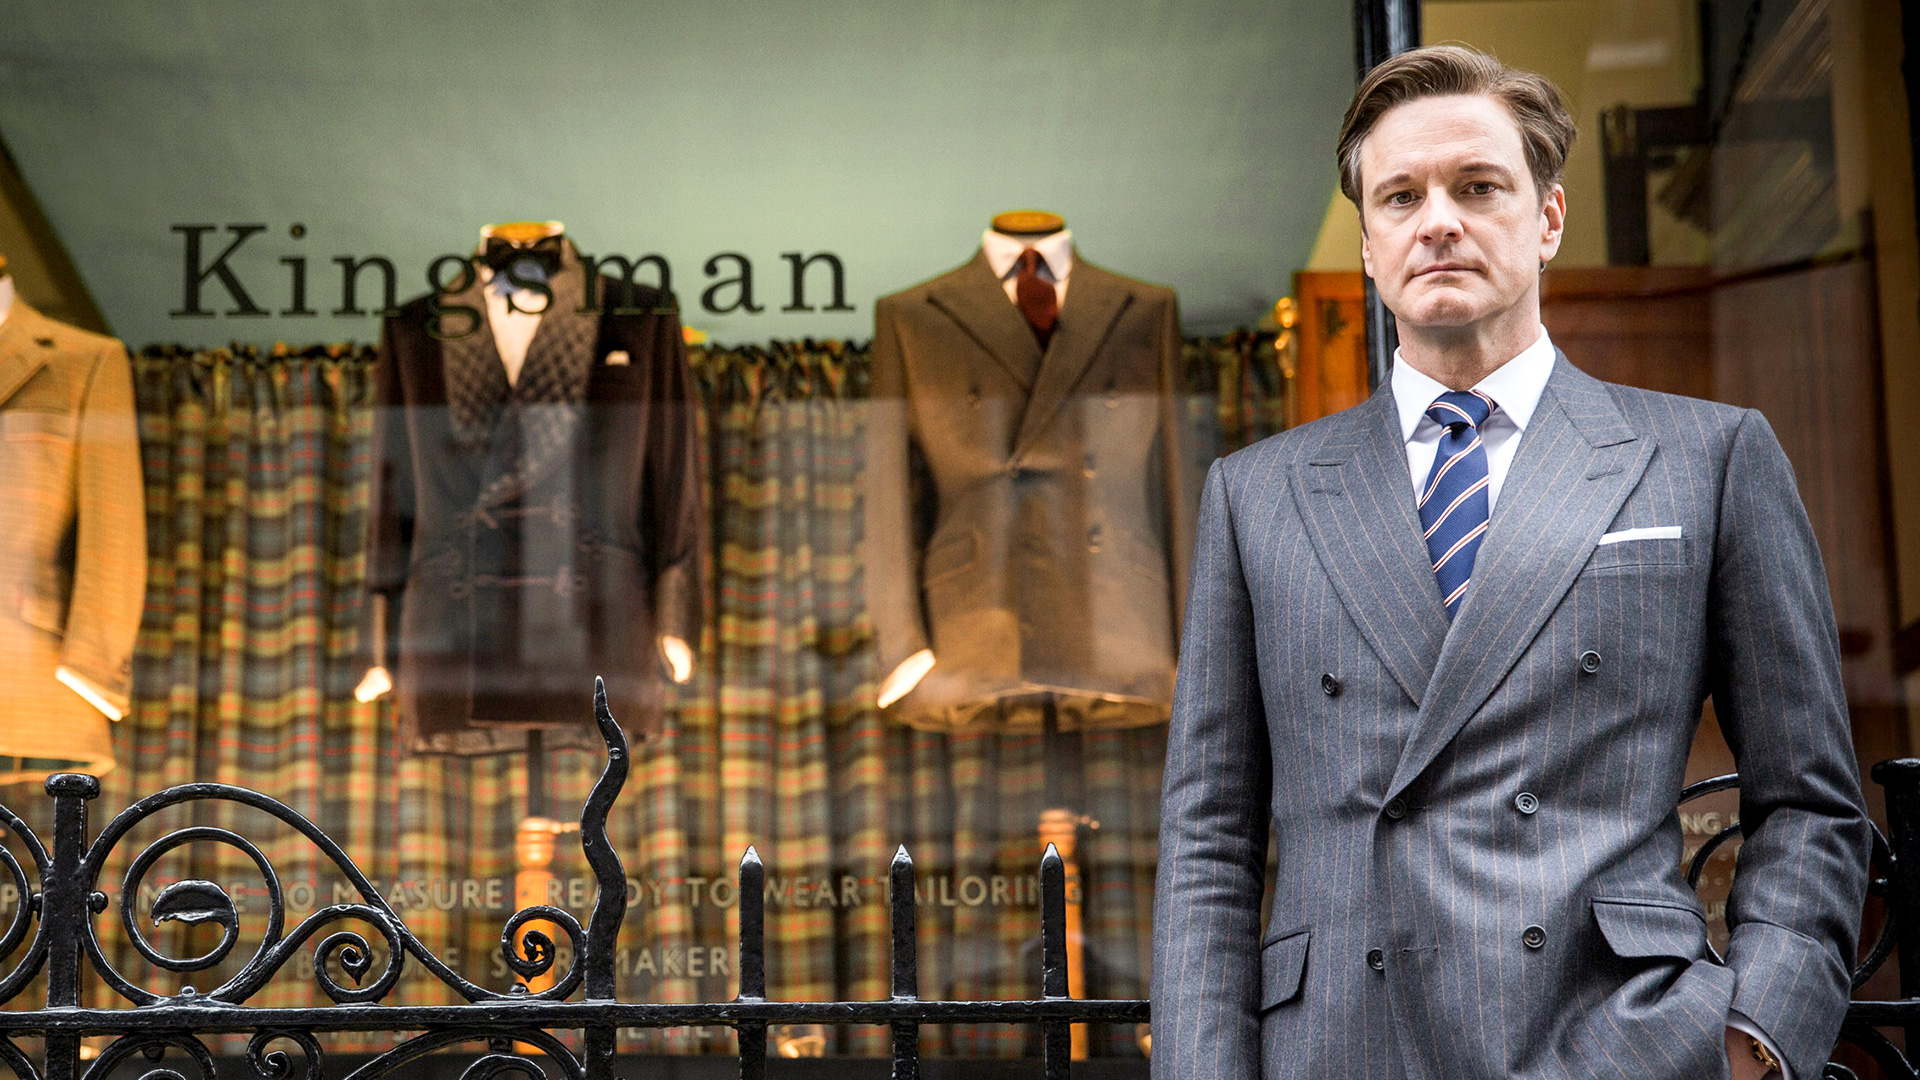 A New ‘Kingsman’ Film Is Reportedly Set To Premiere On November 8, 2019